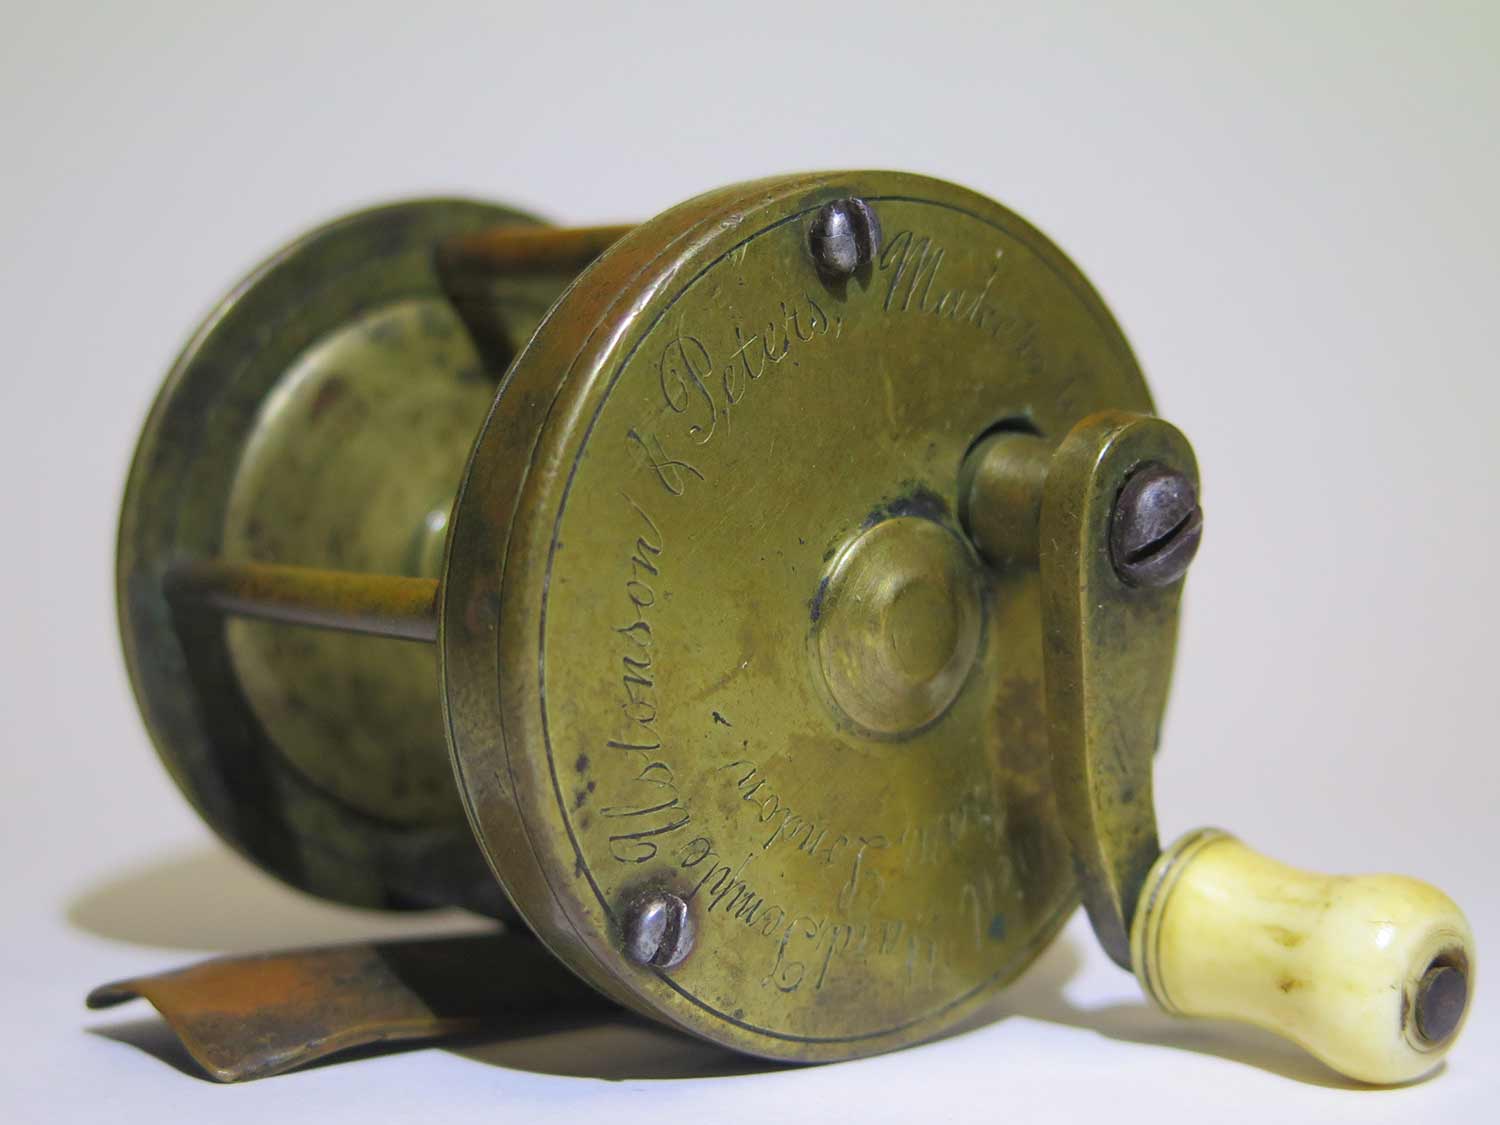 South Bend Vintage All Freshwater Fly Fishing Reels for sale